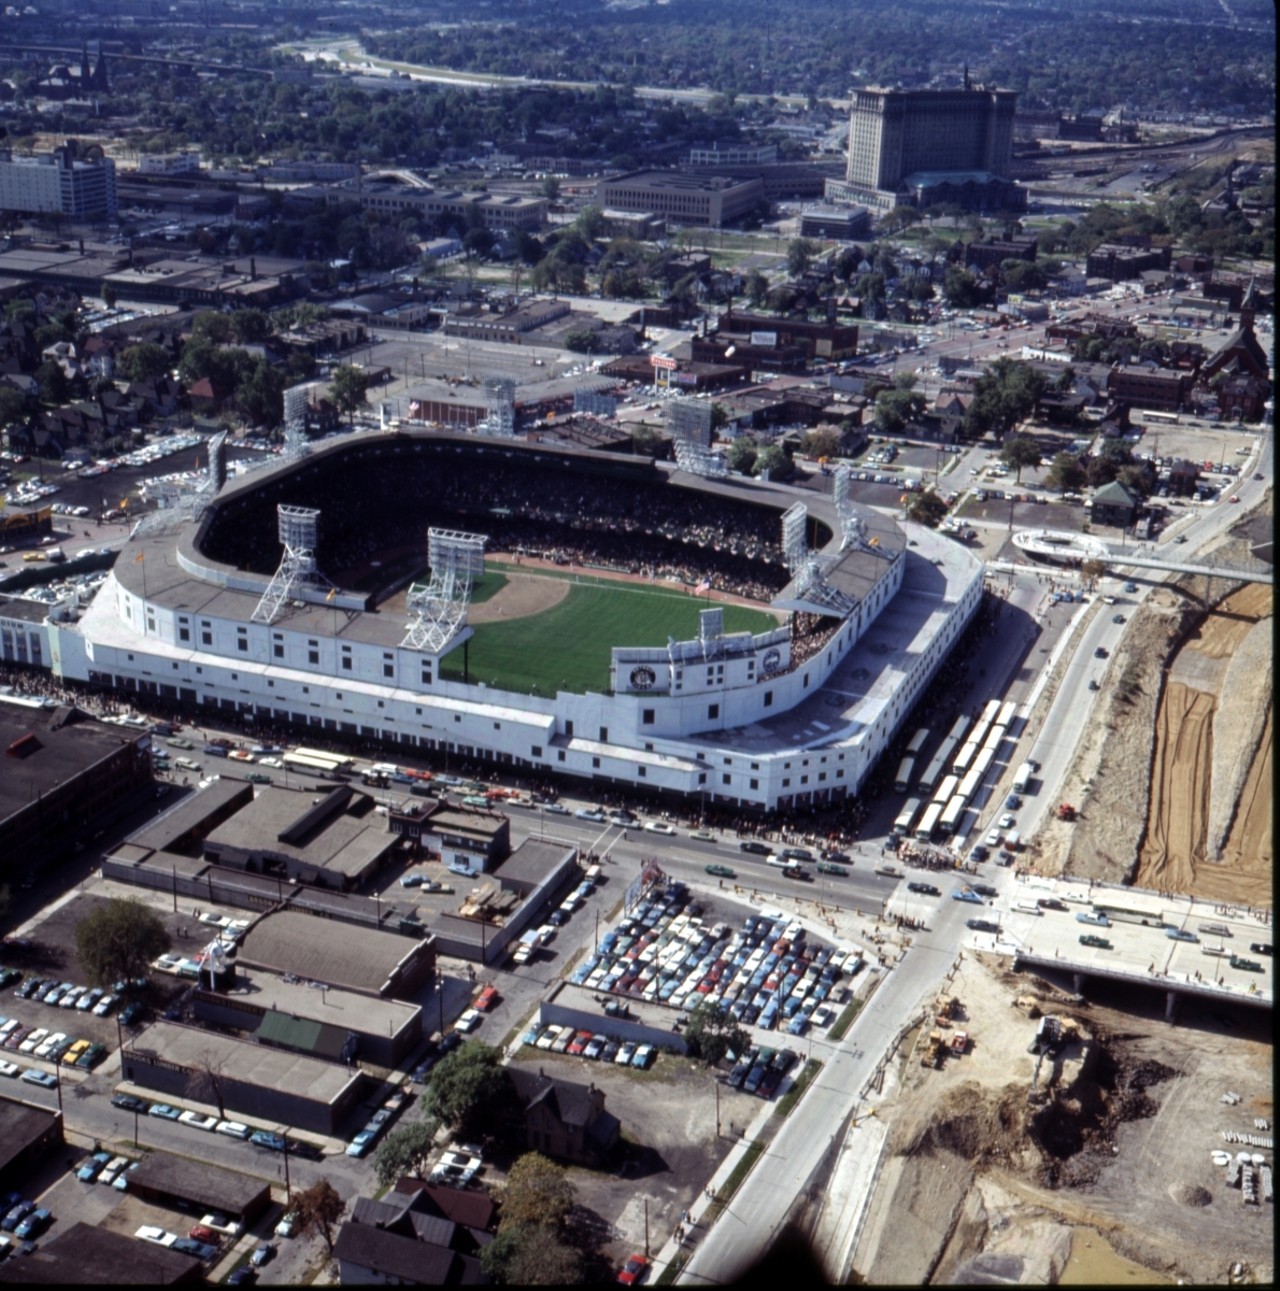 Tiger Stadium from the air during the 1968 championship season.